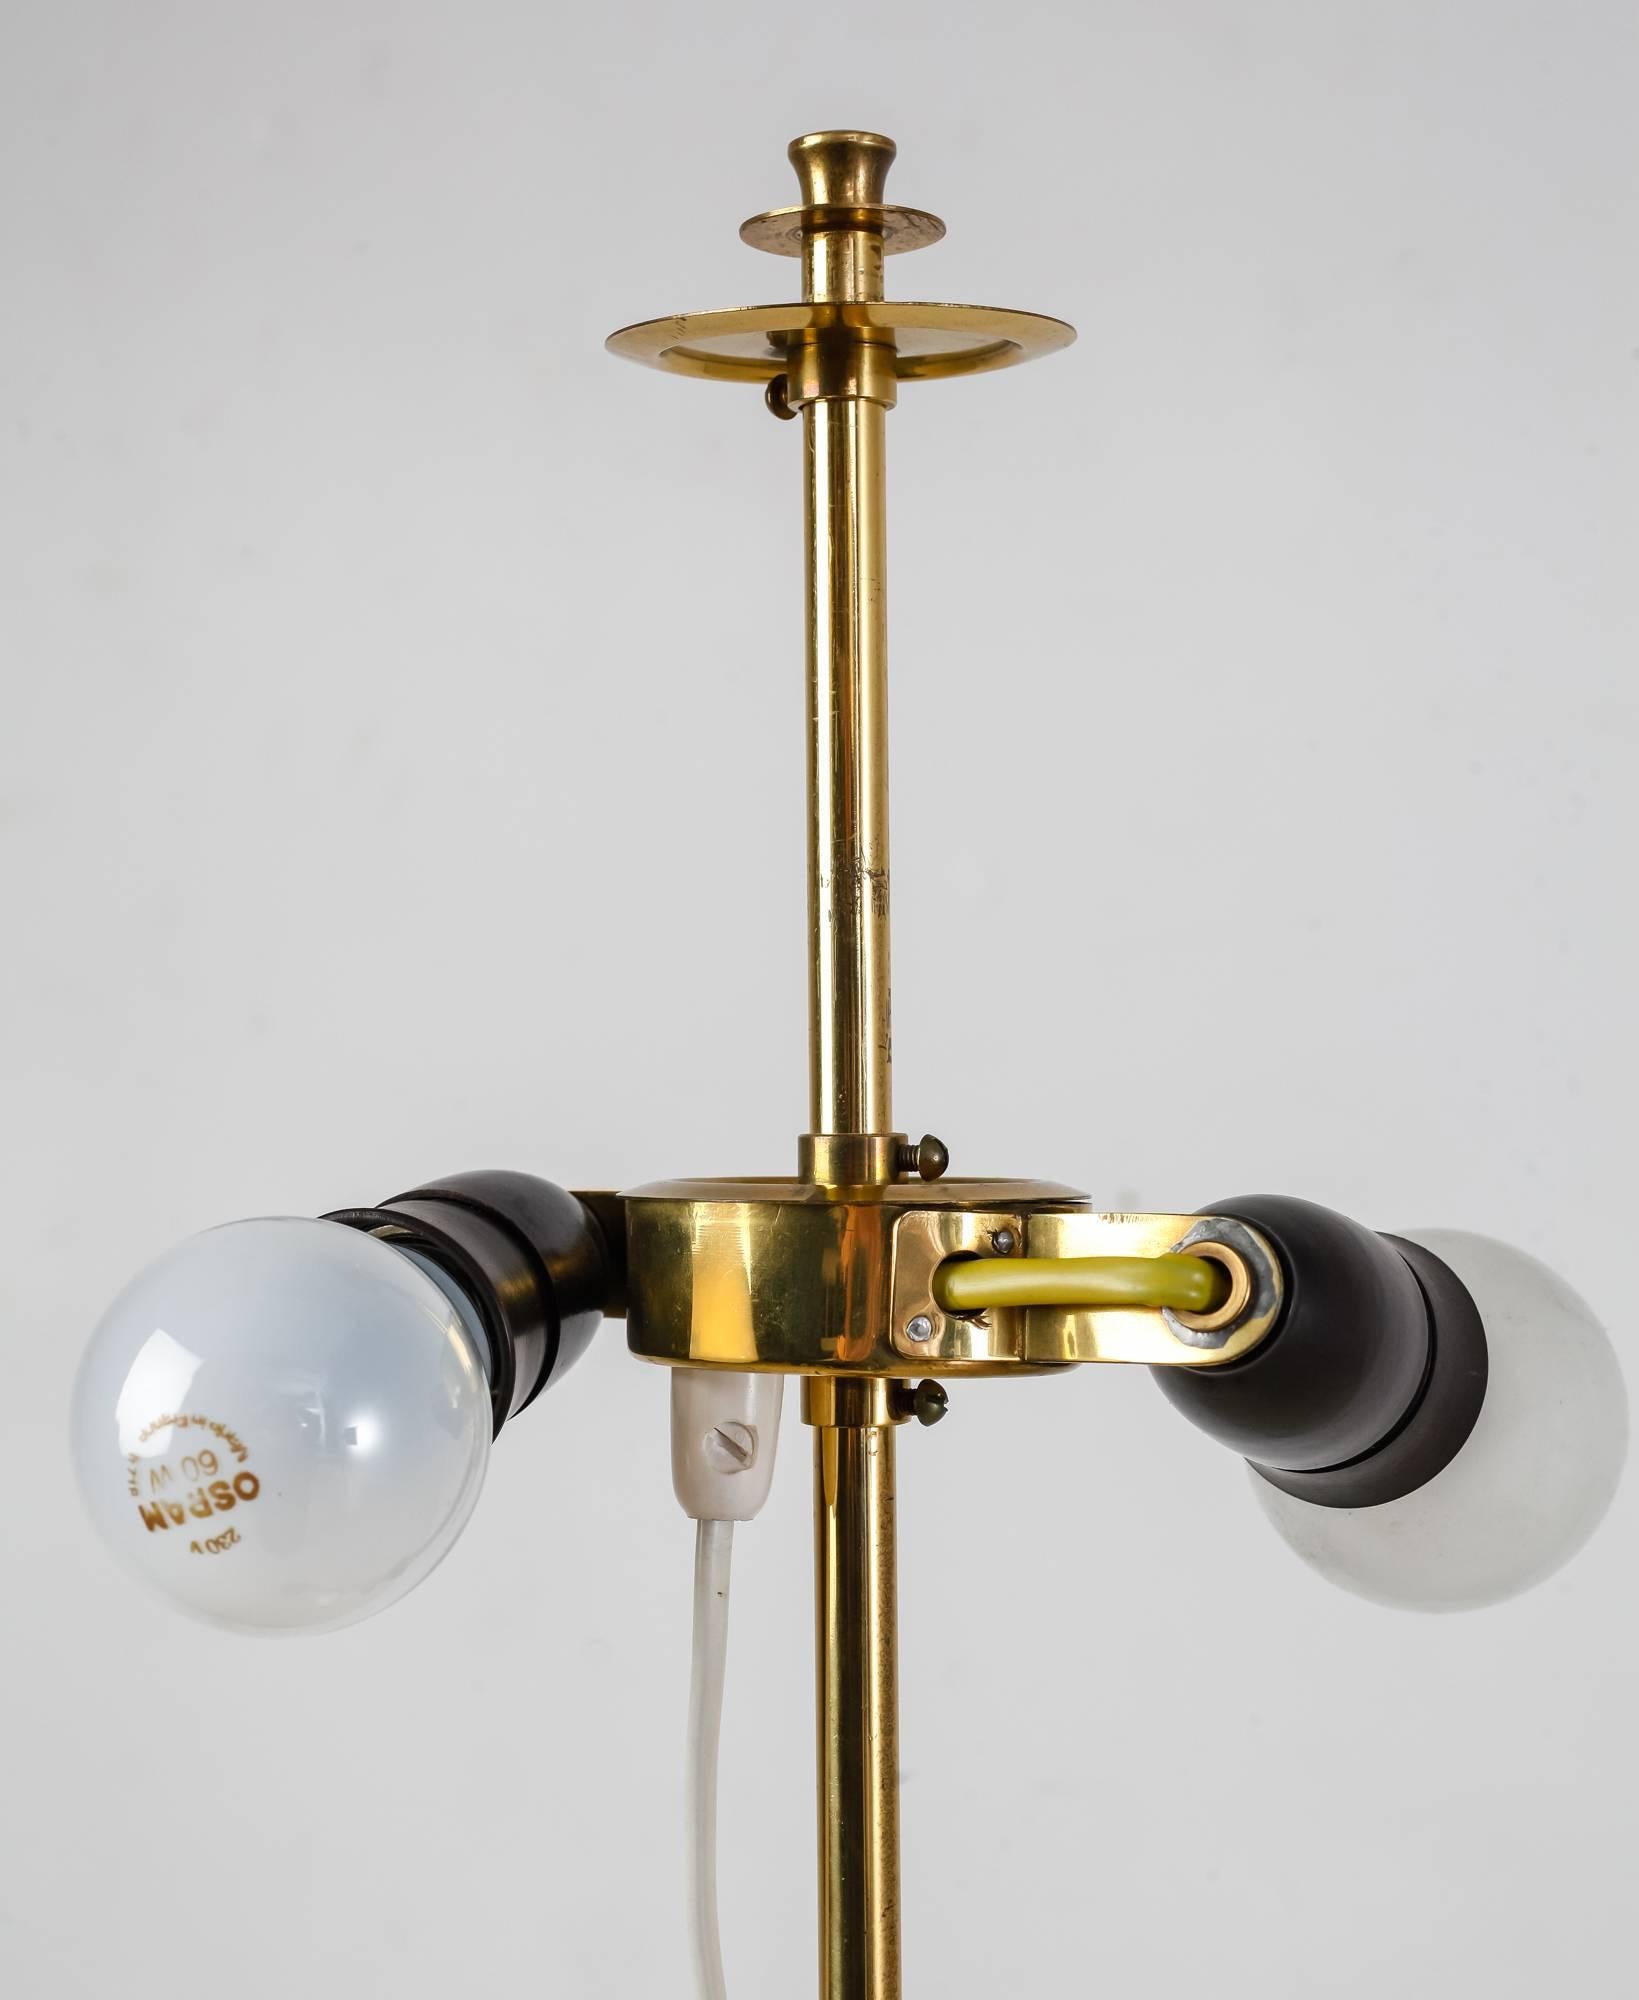 Finnish Brass Floor Lamp with Cane Covered Stem, Finland, 1950s For Sale